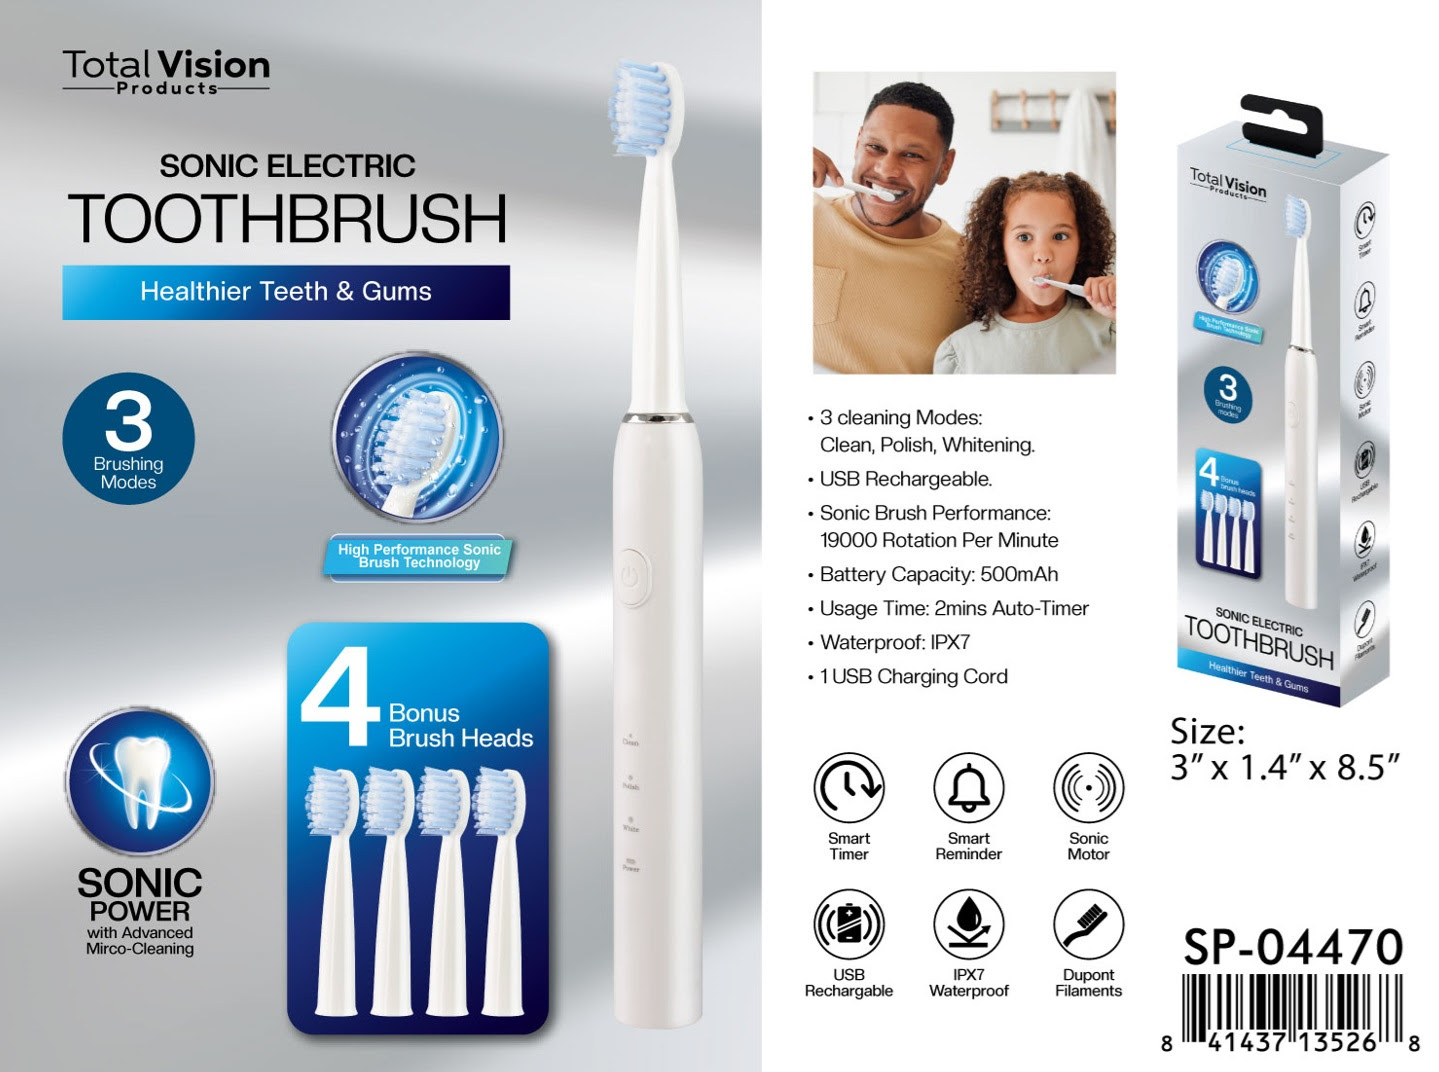 Total Vision Sonic Electric Toothbrushes. 9588 units. EXW Los Angeles $7.95 unit